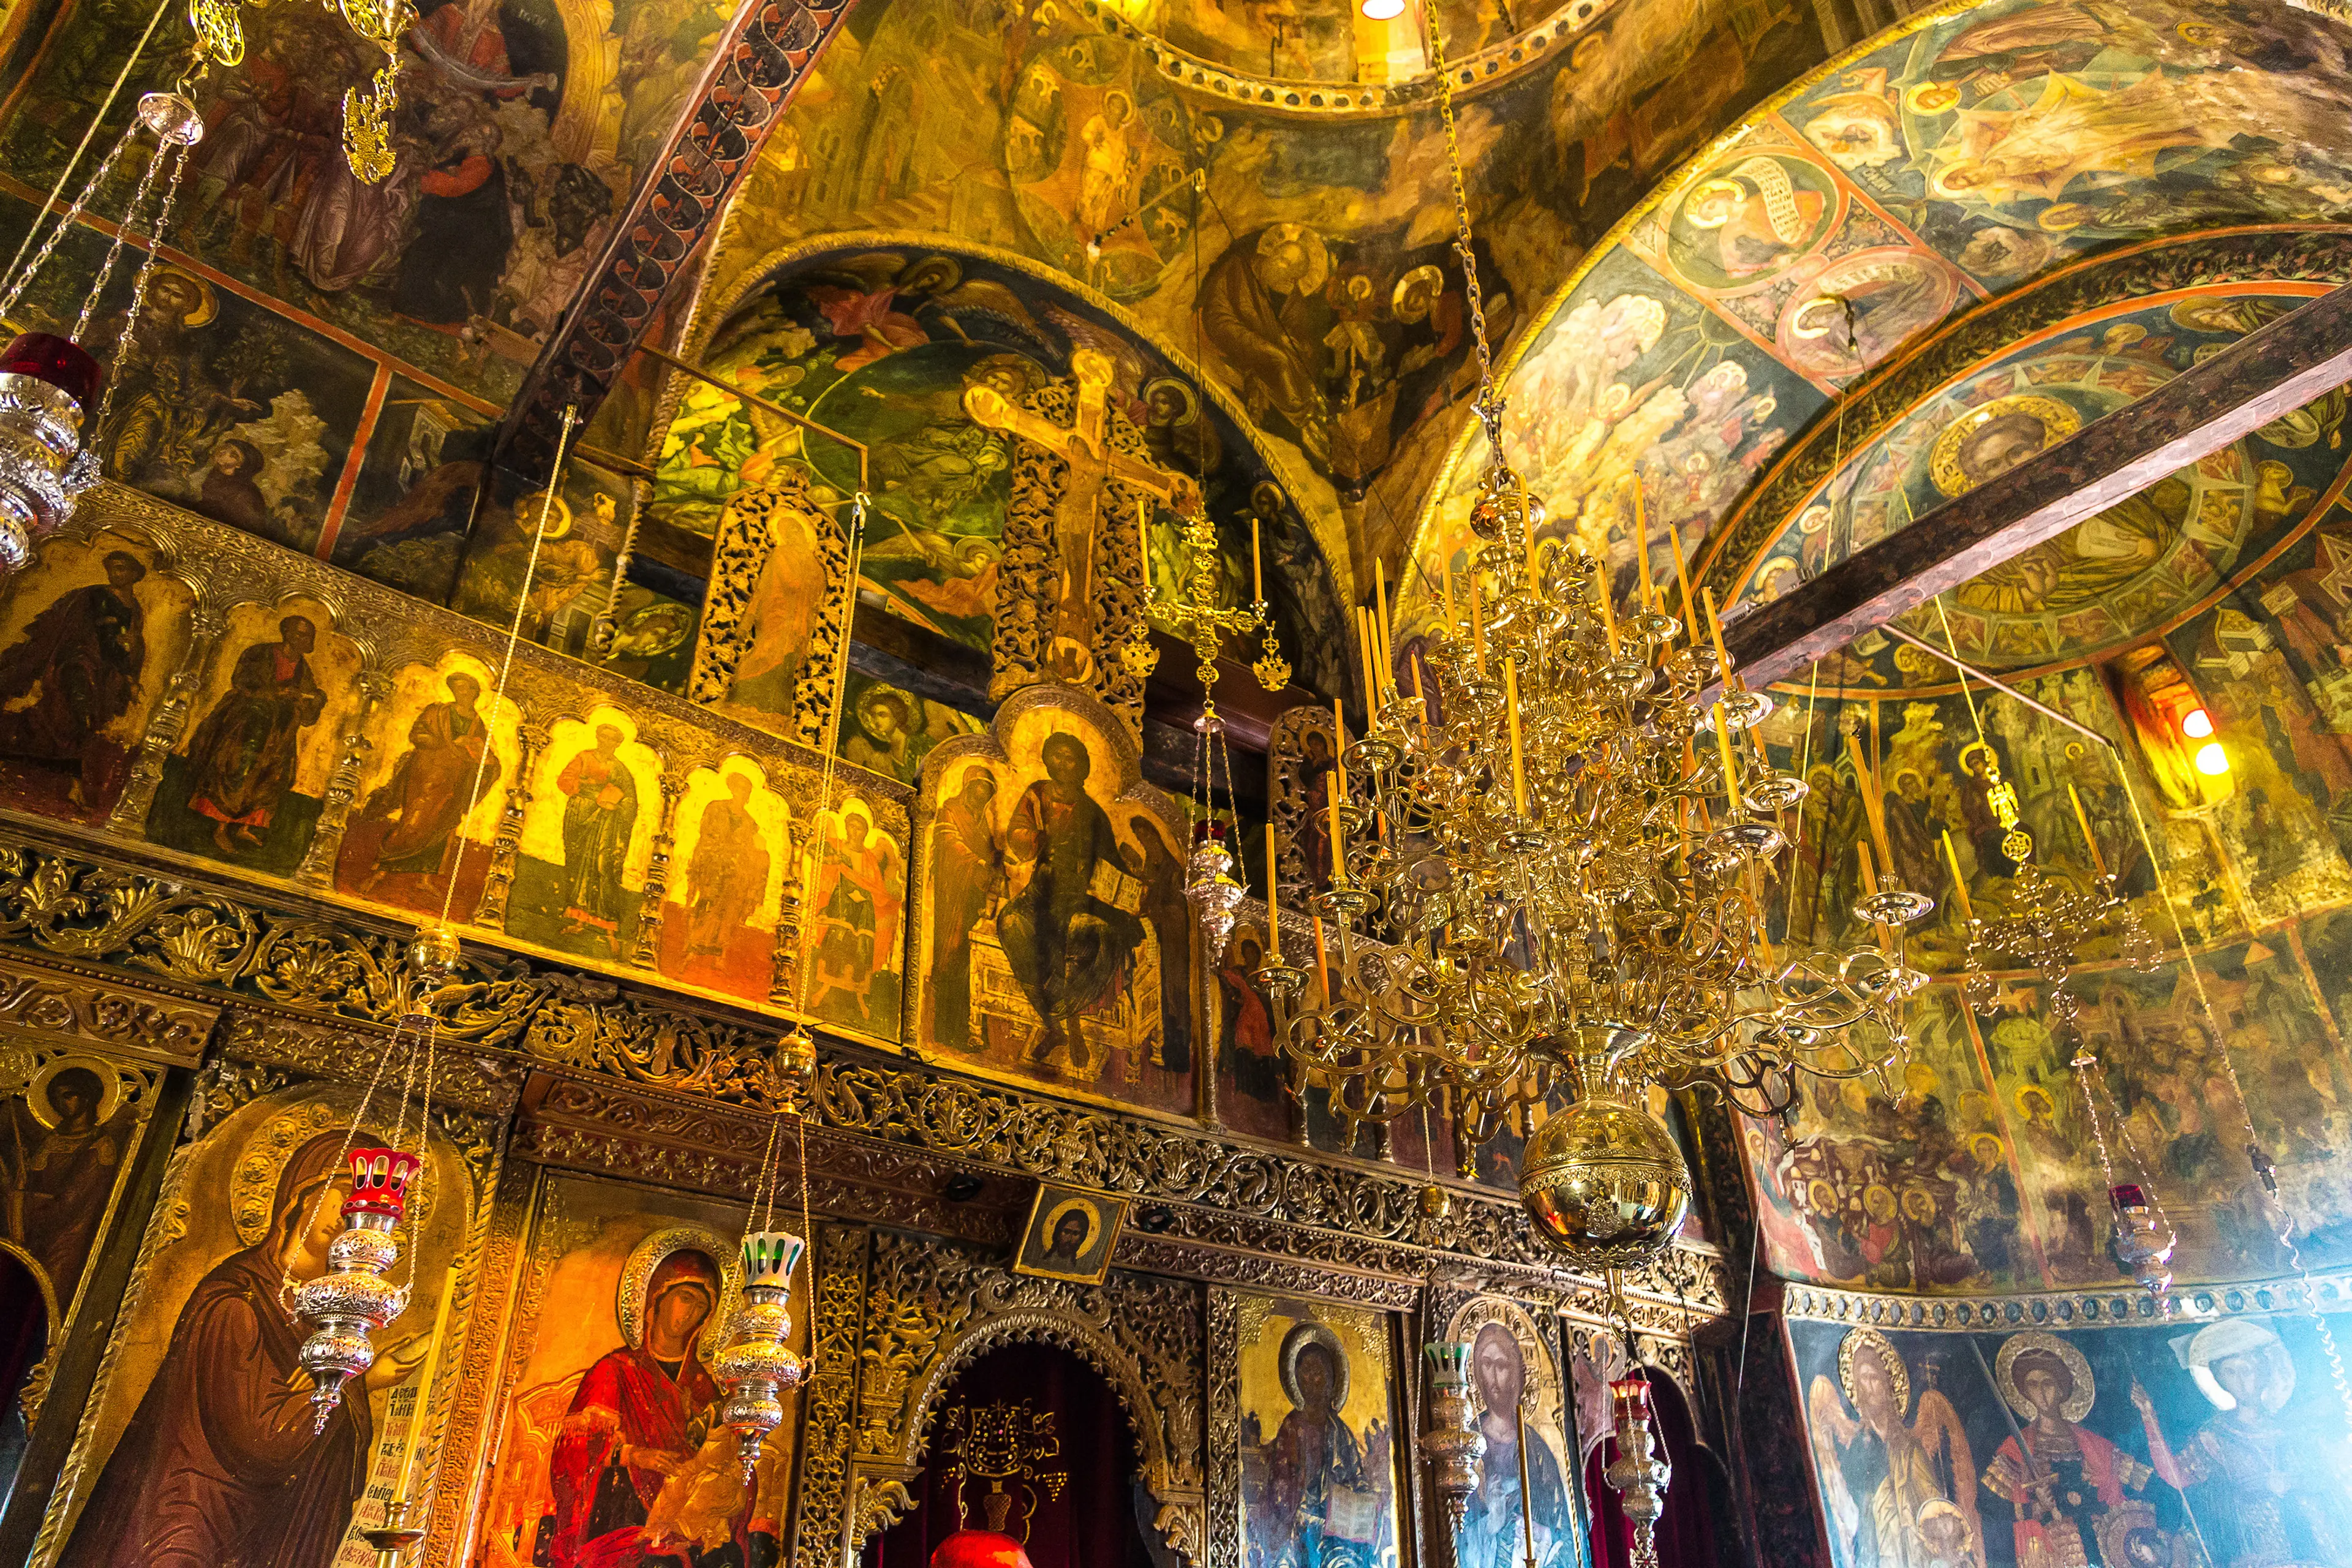 Orthodox iconography and decor of one of the monasteries